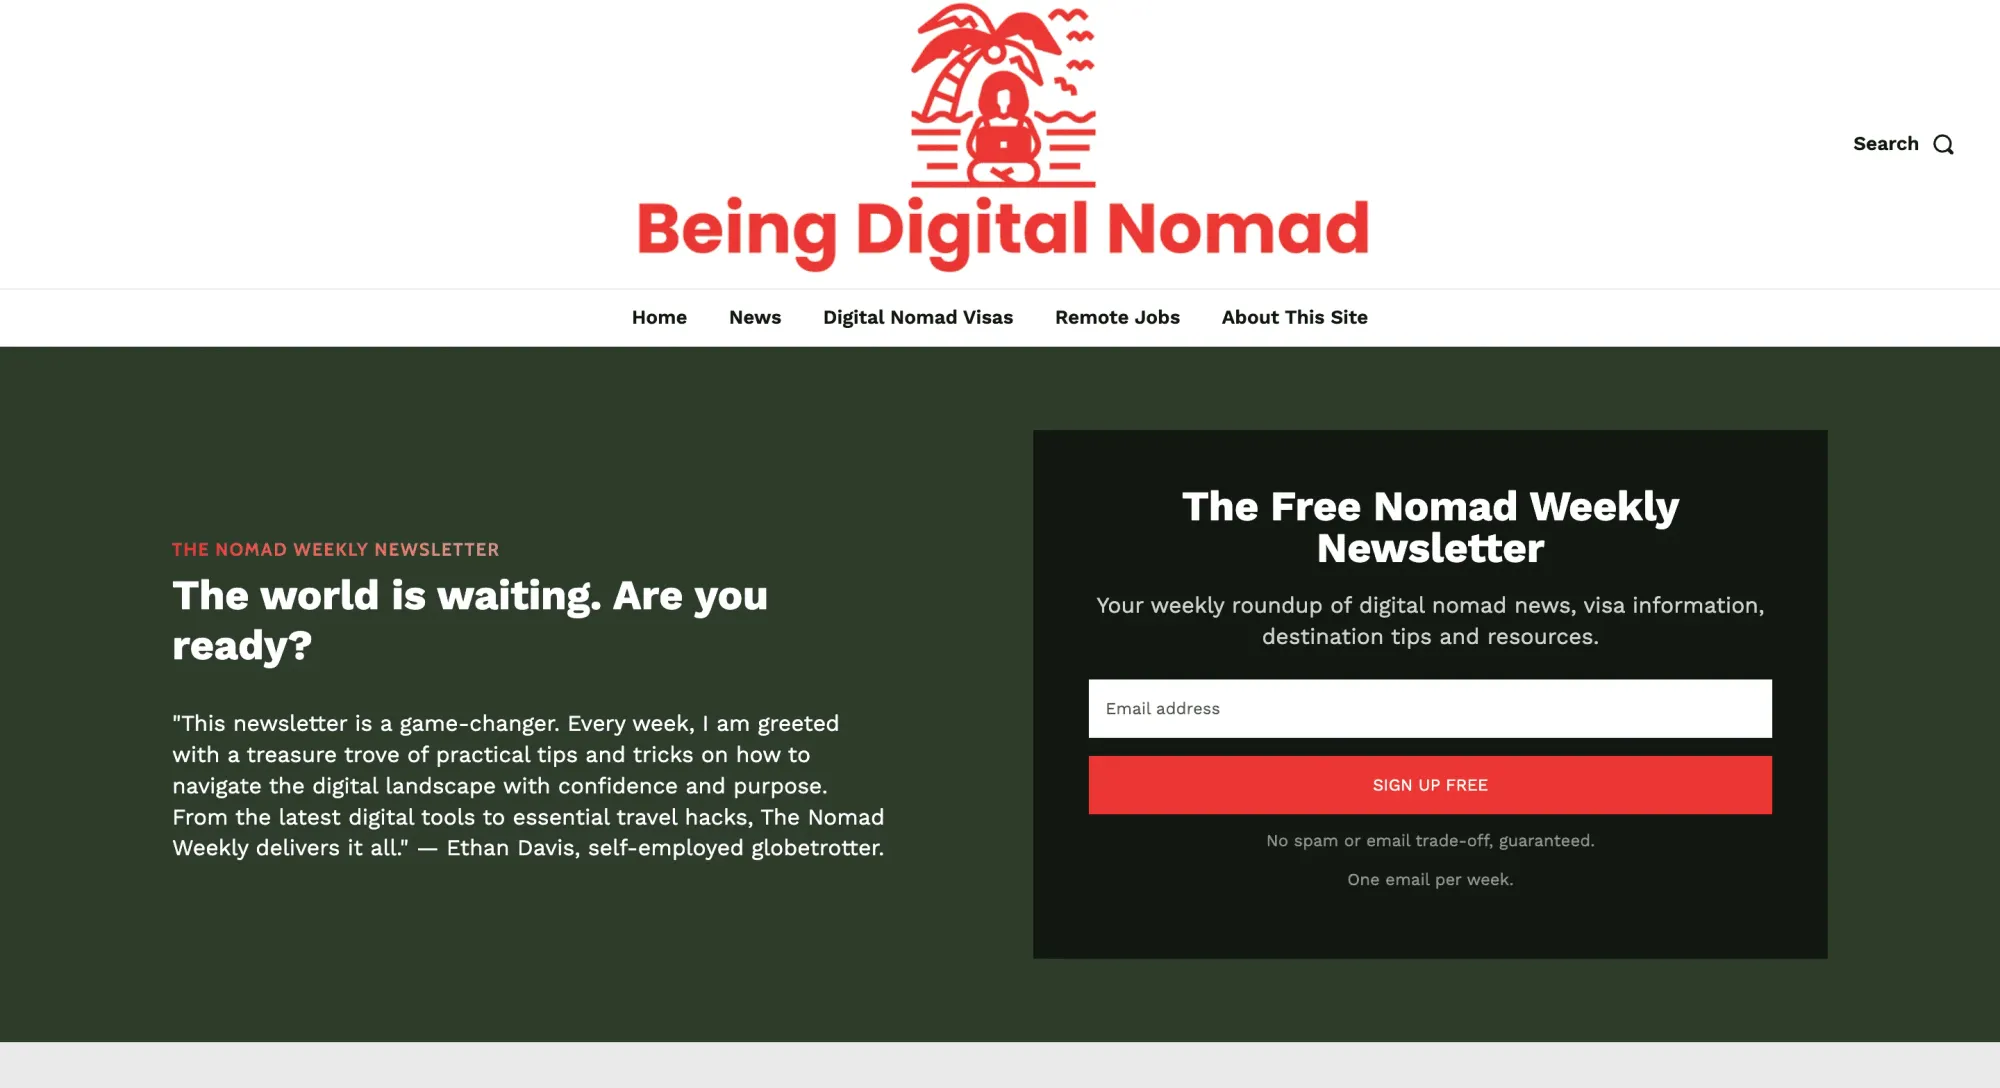 The Nomad Weekly Newsletter Webpage